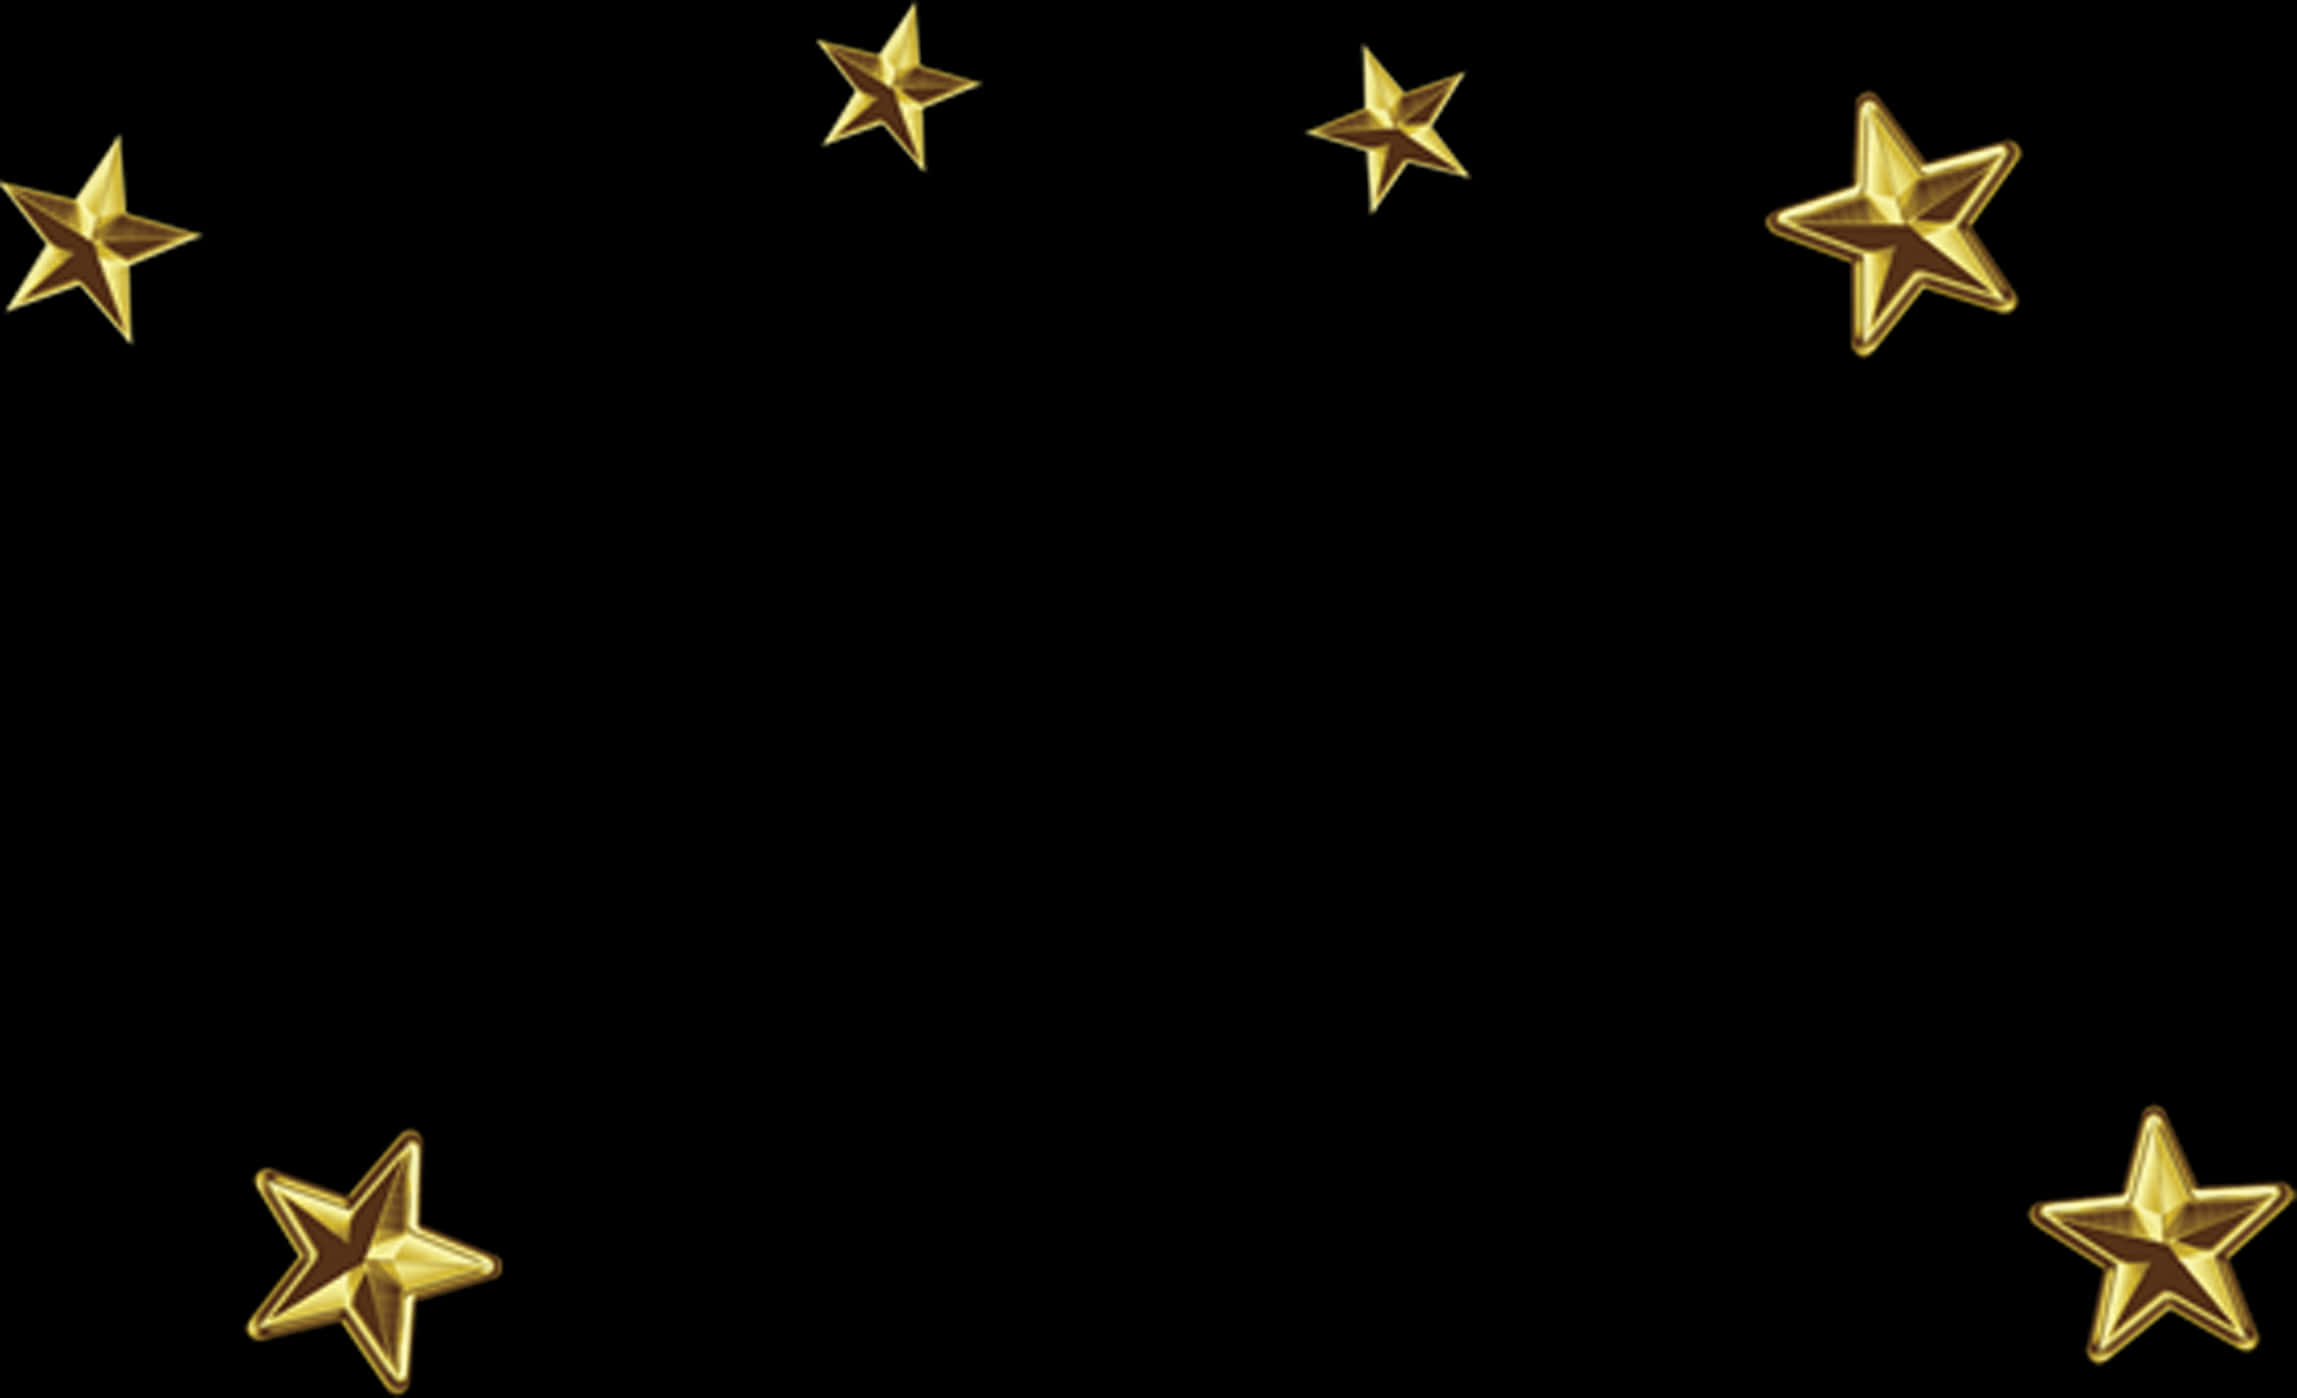 A Black Background With Gold Stars